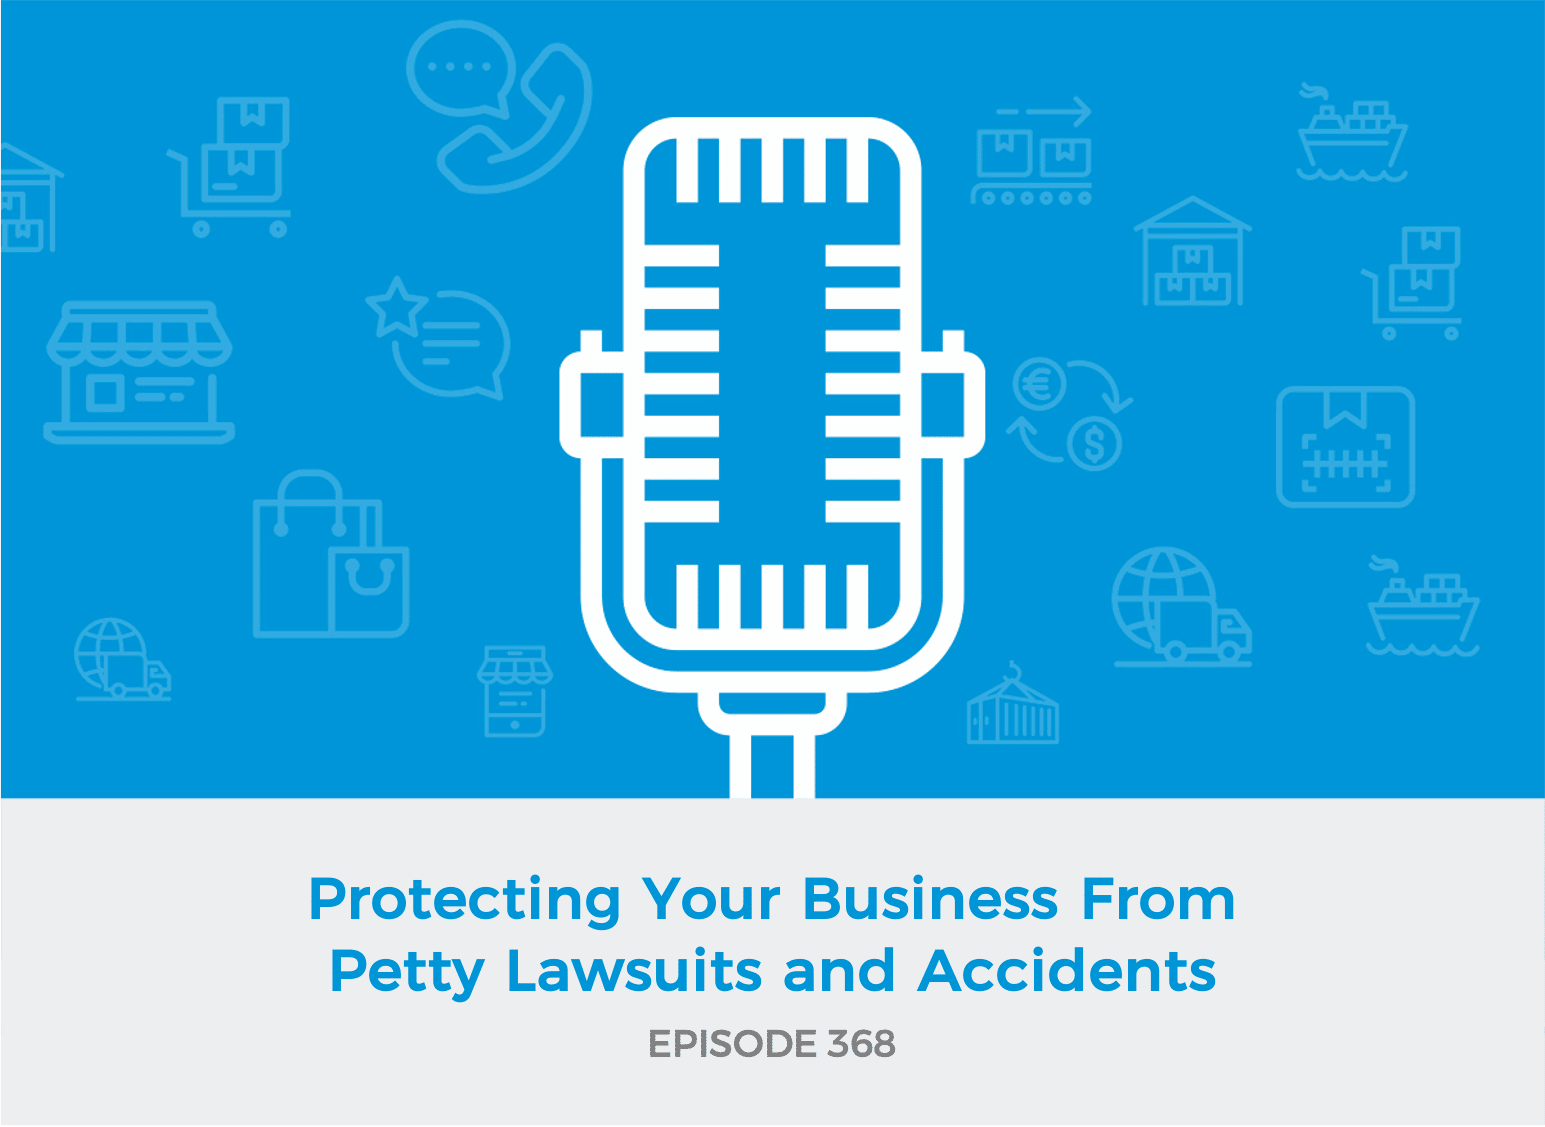 Podcast about Protecting Your Business From Petty Lawsuits and Accidents